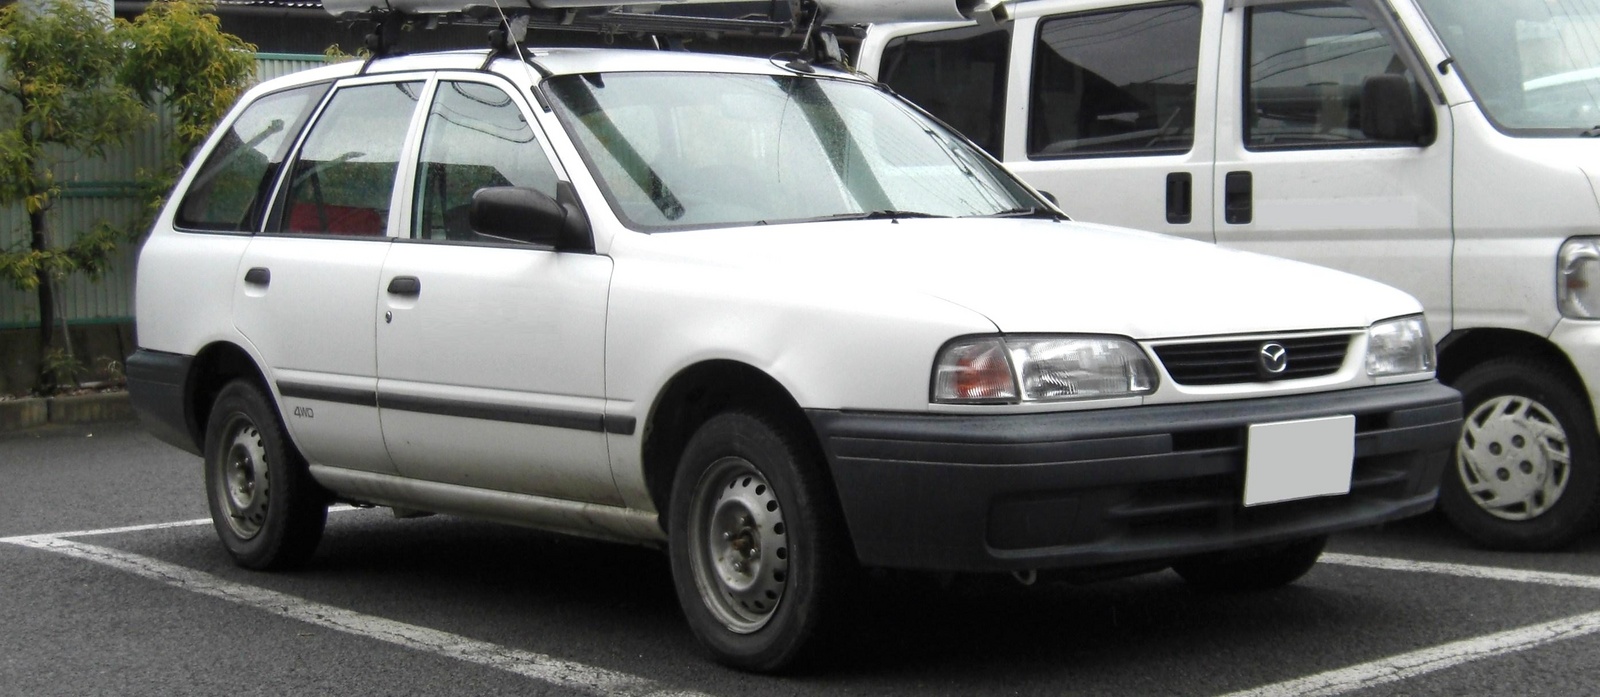 1996 Nissan sunny review #10